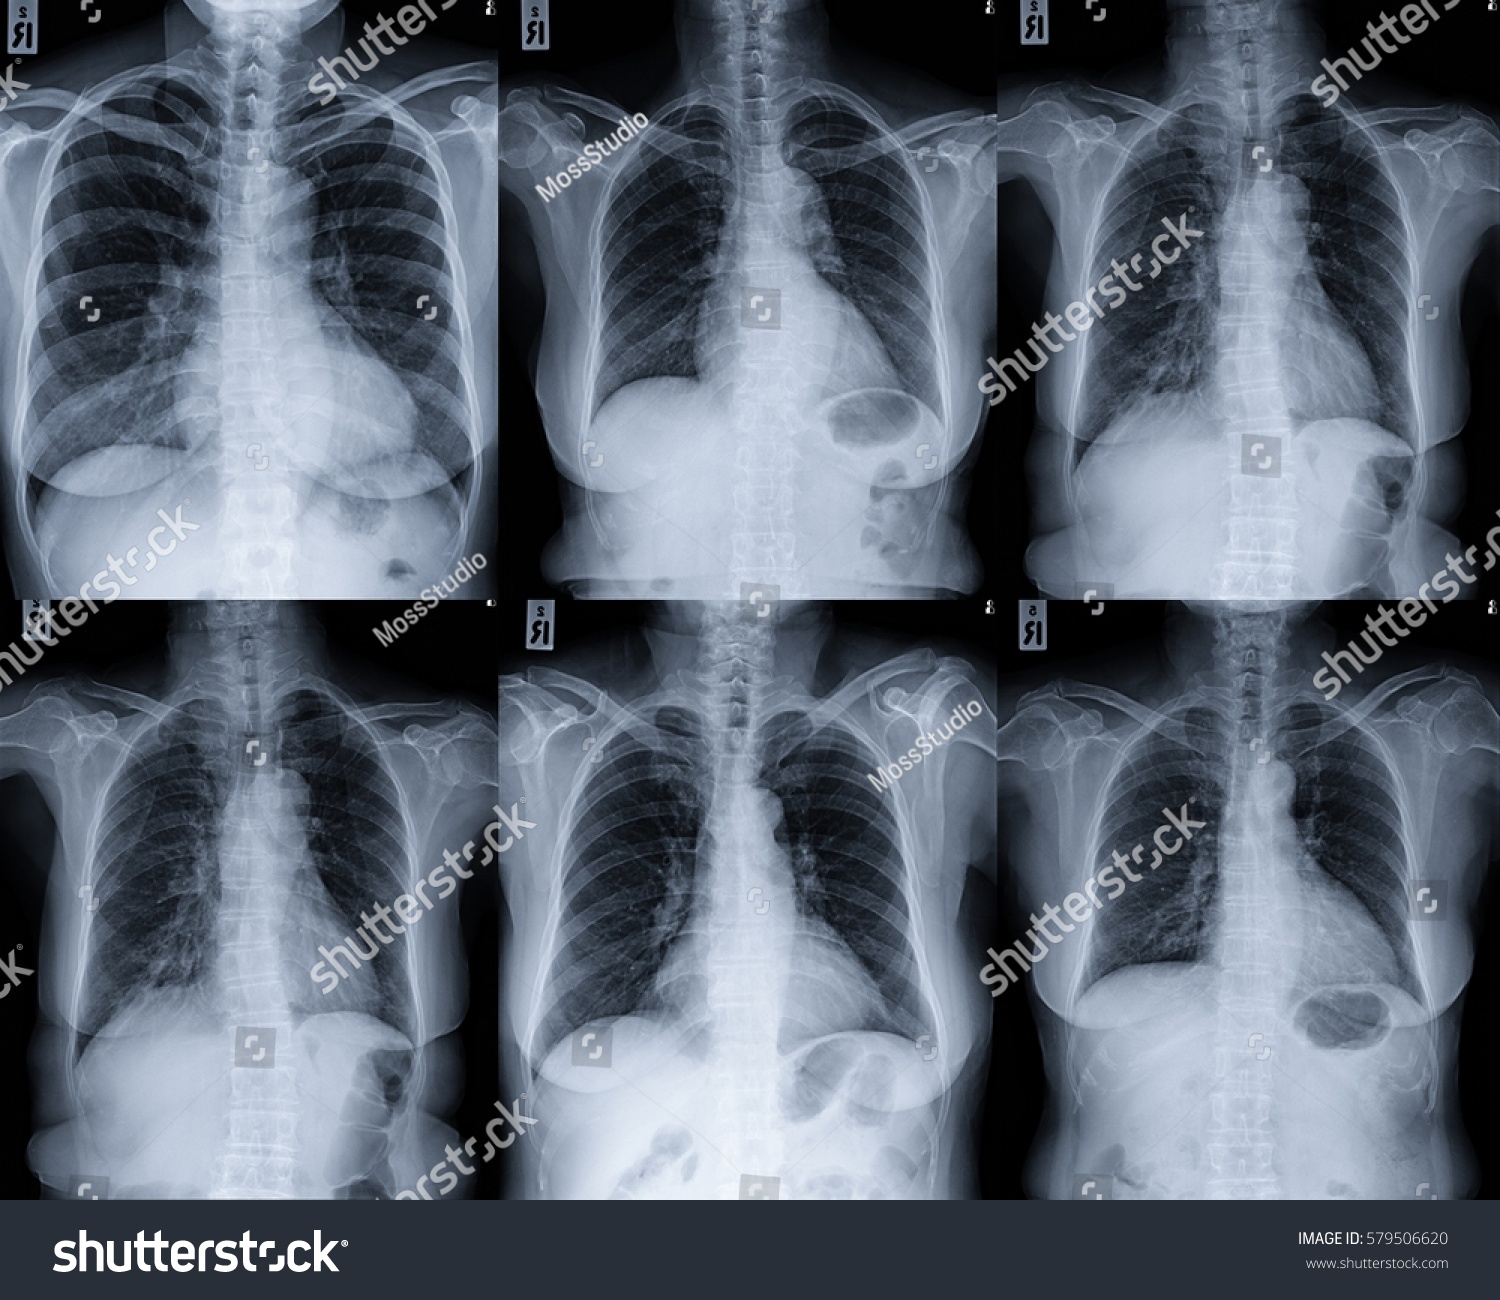 Mild Cardiomegaly Seen Chest Radiography Collection Stock Photo Edit Now 579506620